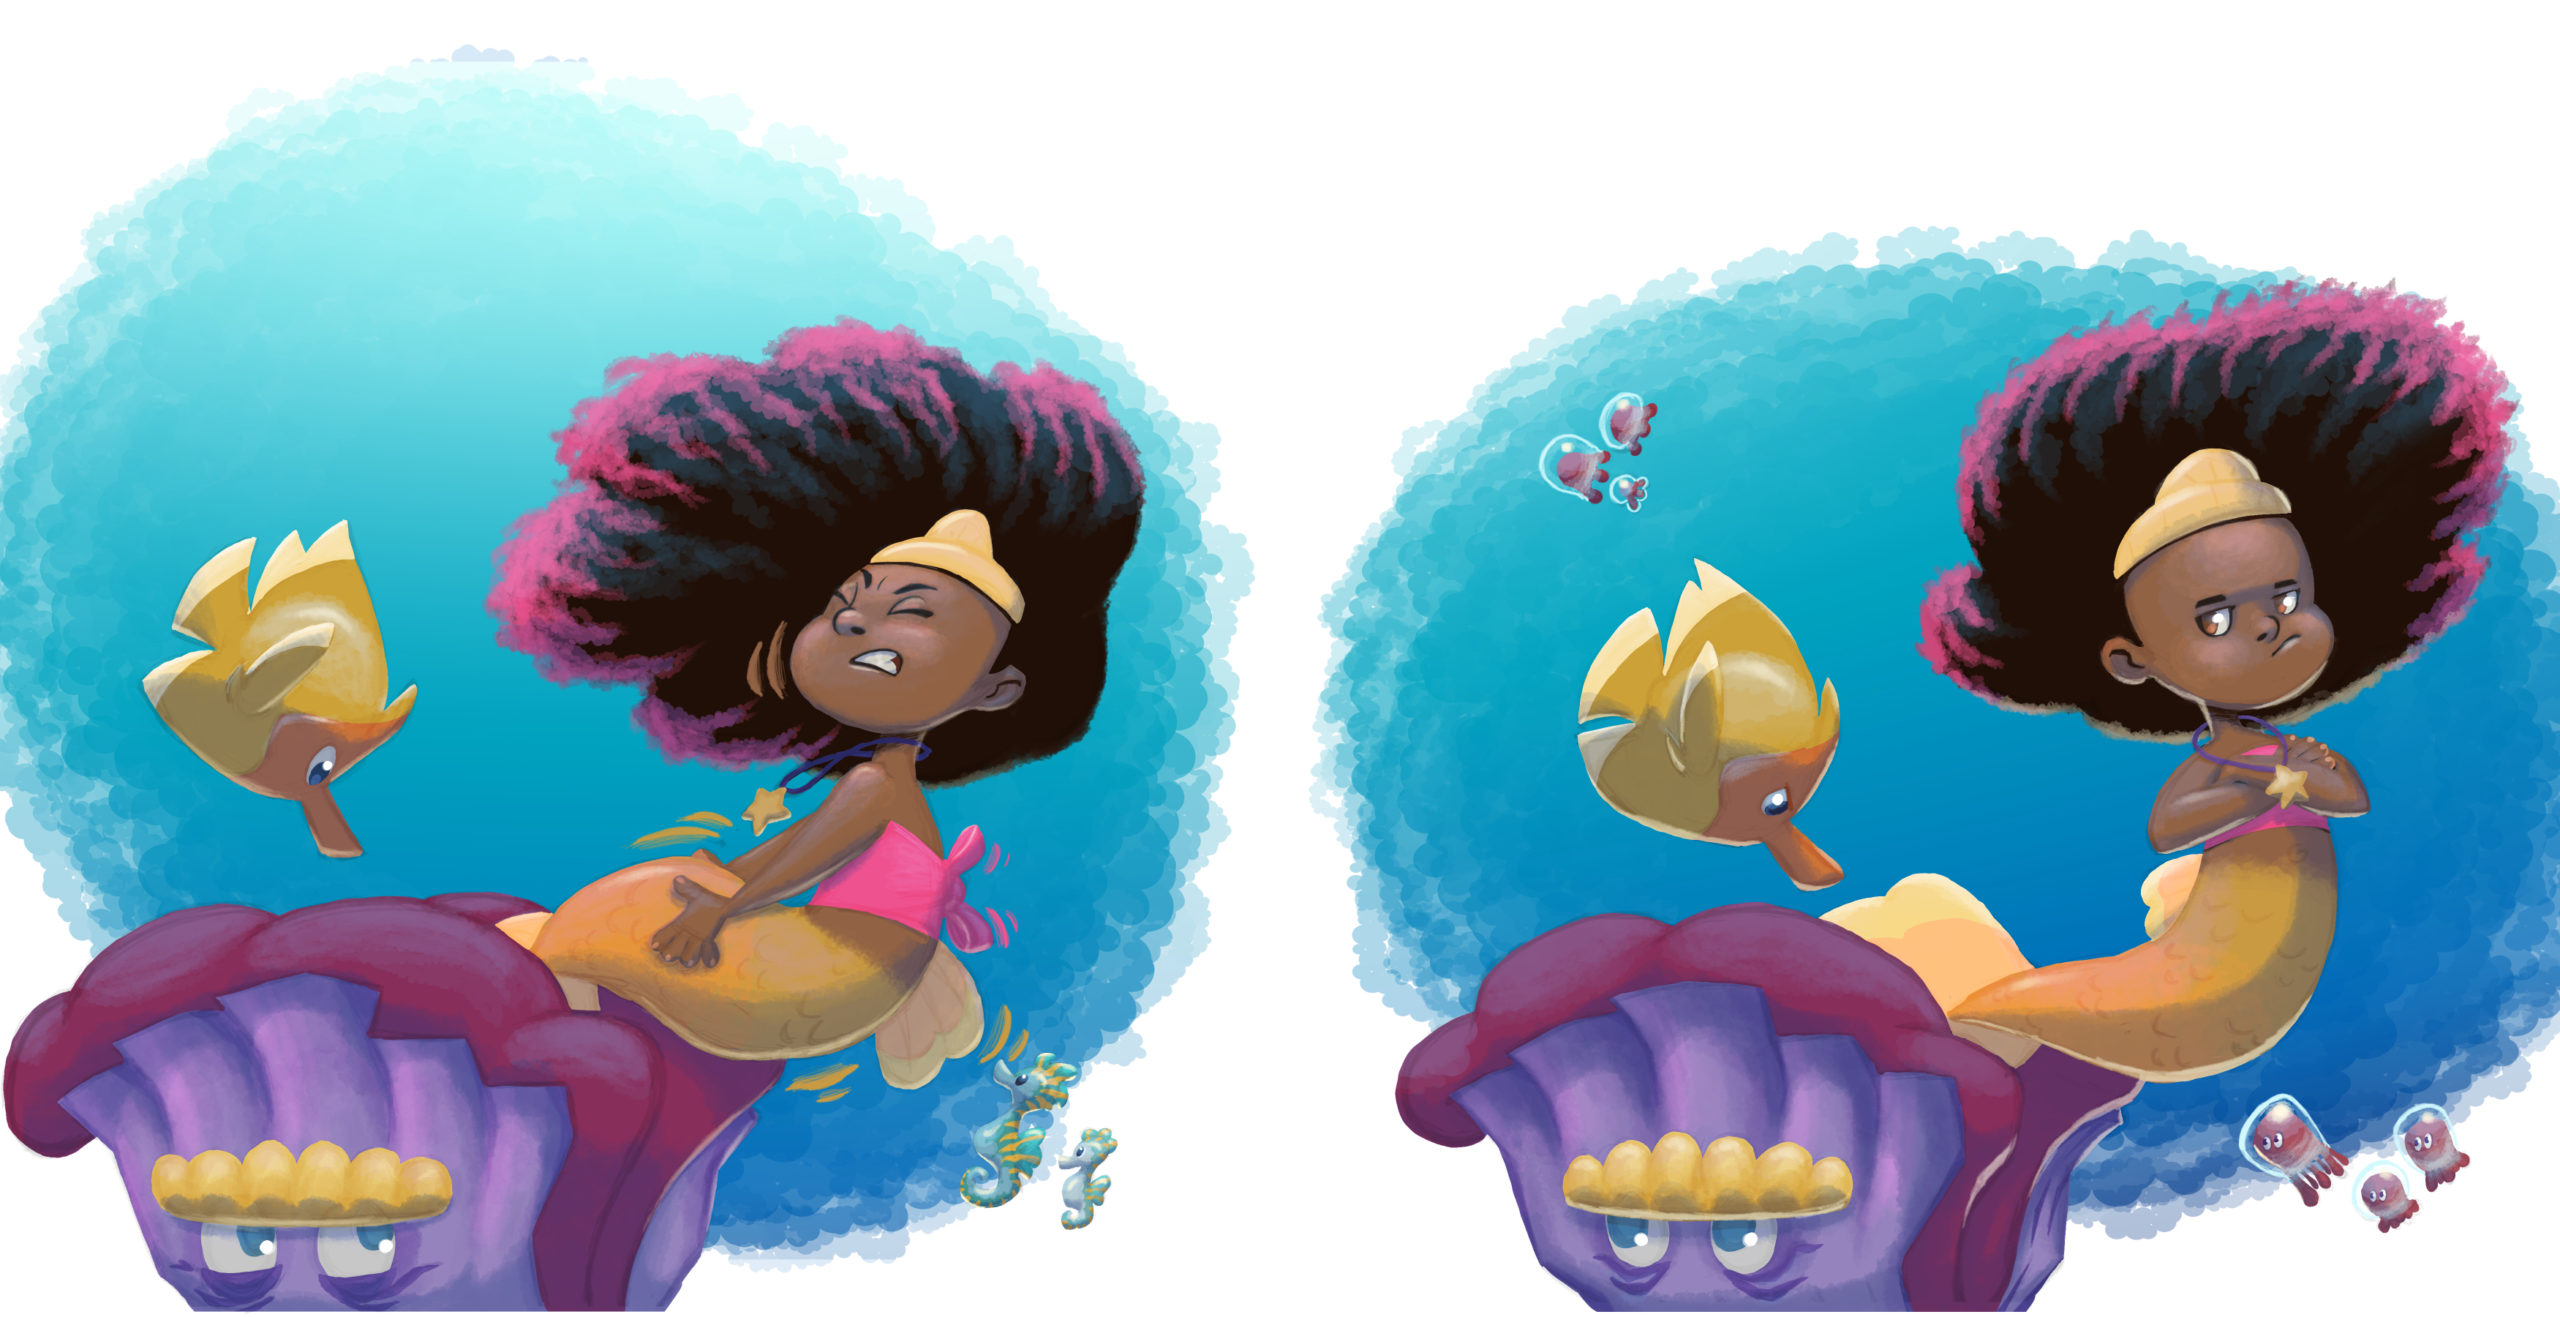 Professional Illustration for Children's Books, Games, and Education - Mermaid and The Grumpy Old Clam Pages 7 and 8